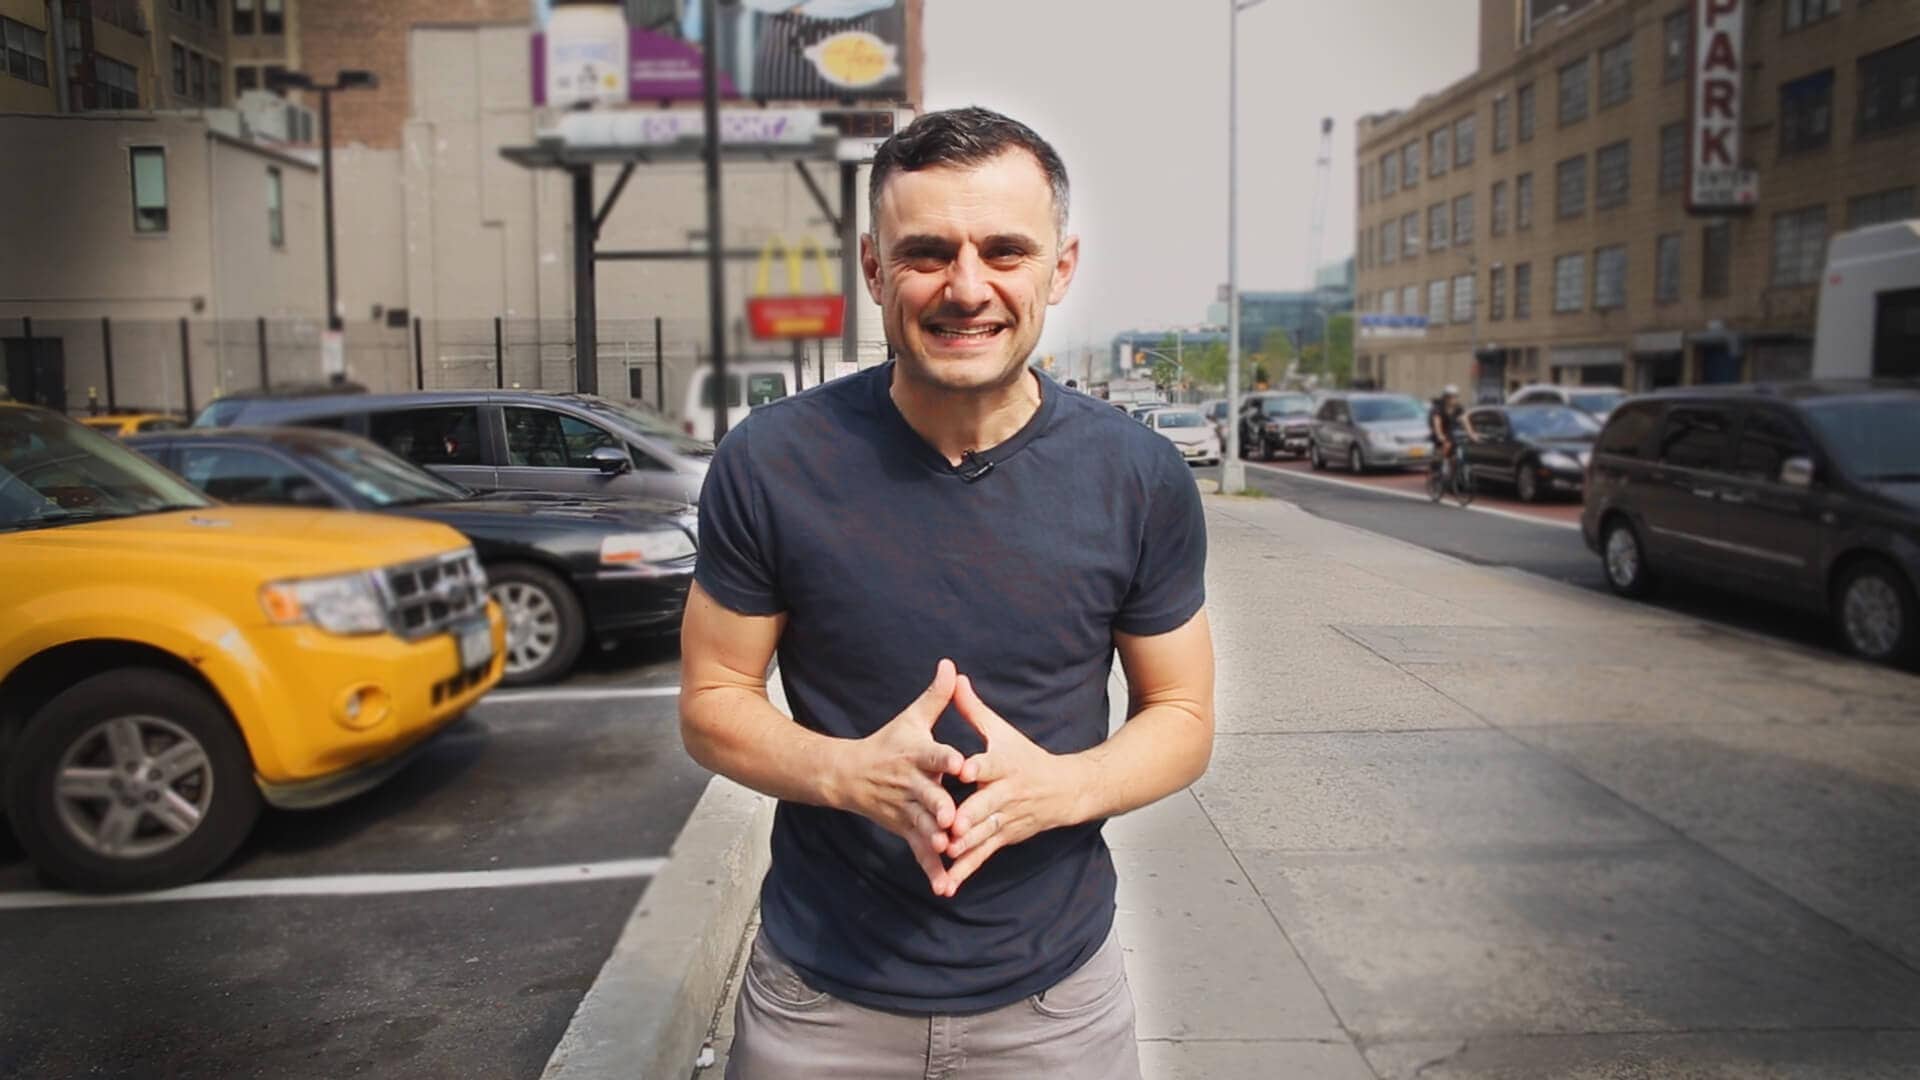 #AskGaryVee Episode 115: What’s More Important, Being Compassionate or Being Abrasive?